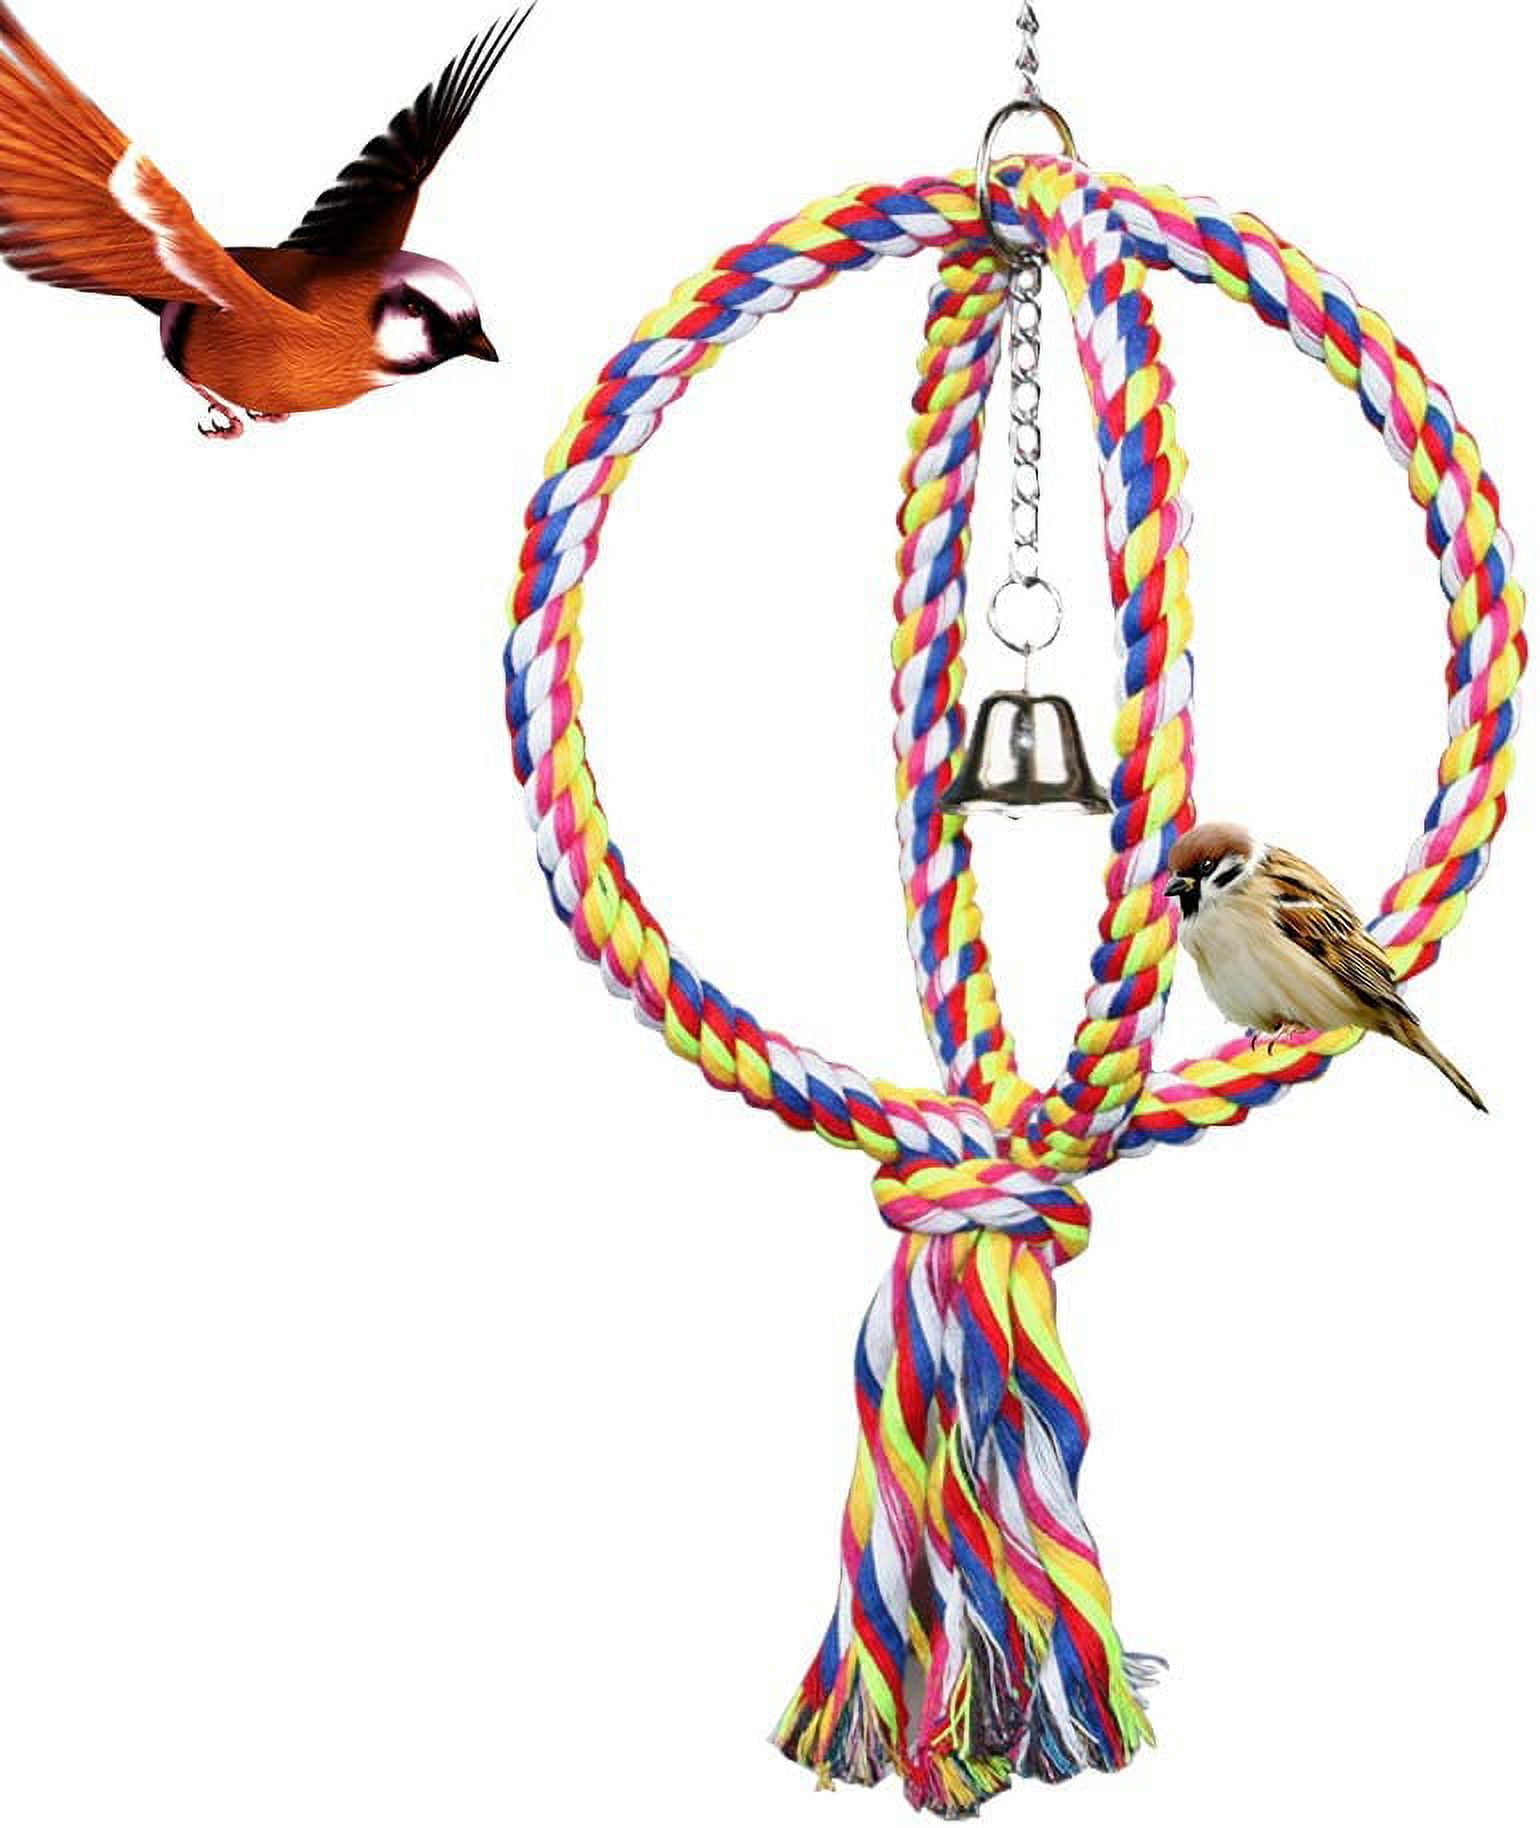 Jusney Bird Rope Perches,Parrot Toys 33 inches Rope Bungee Bird Toy (33  inches)[1 Pack]